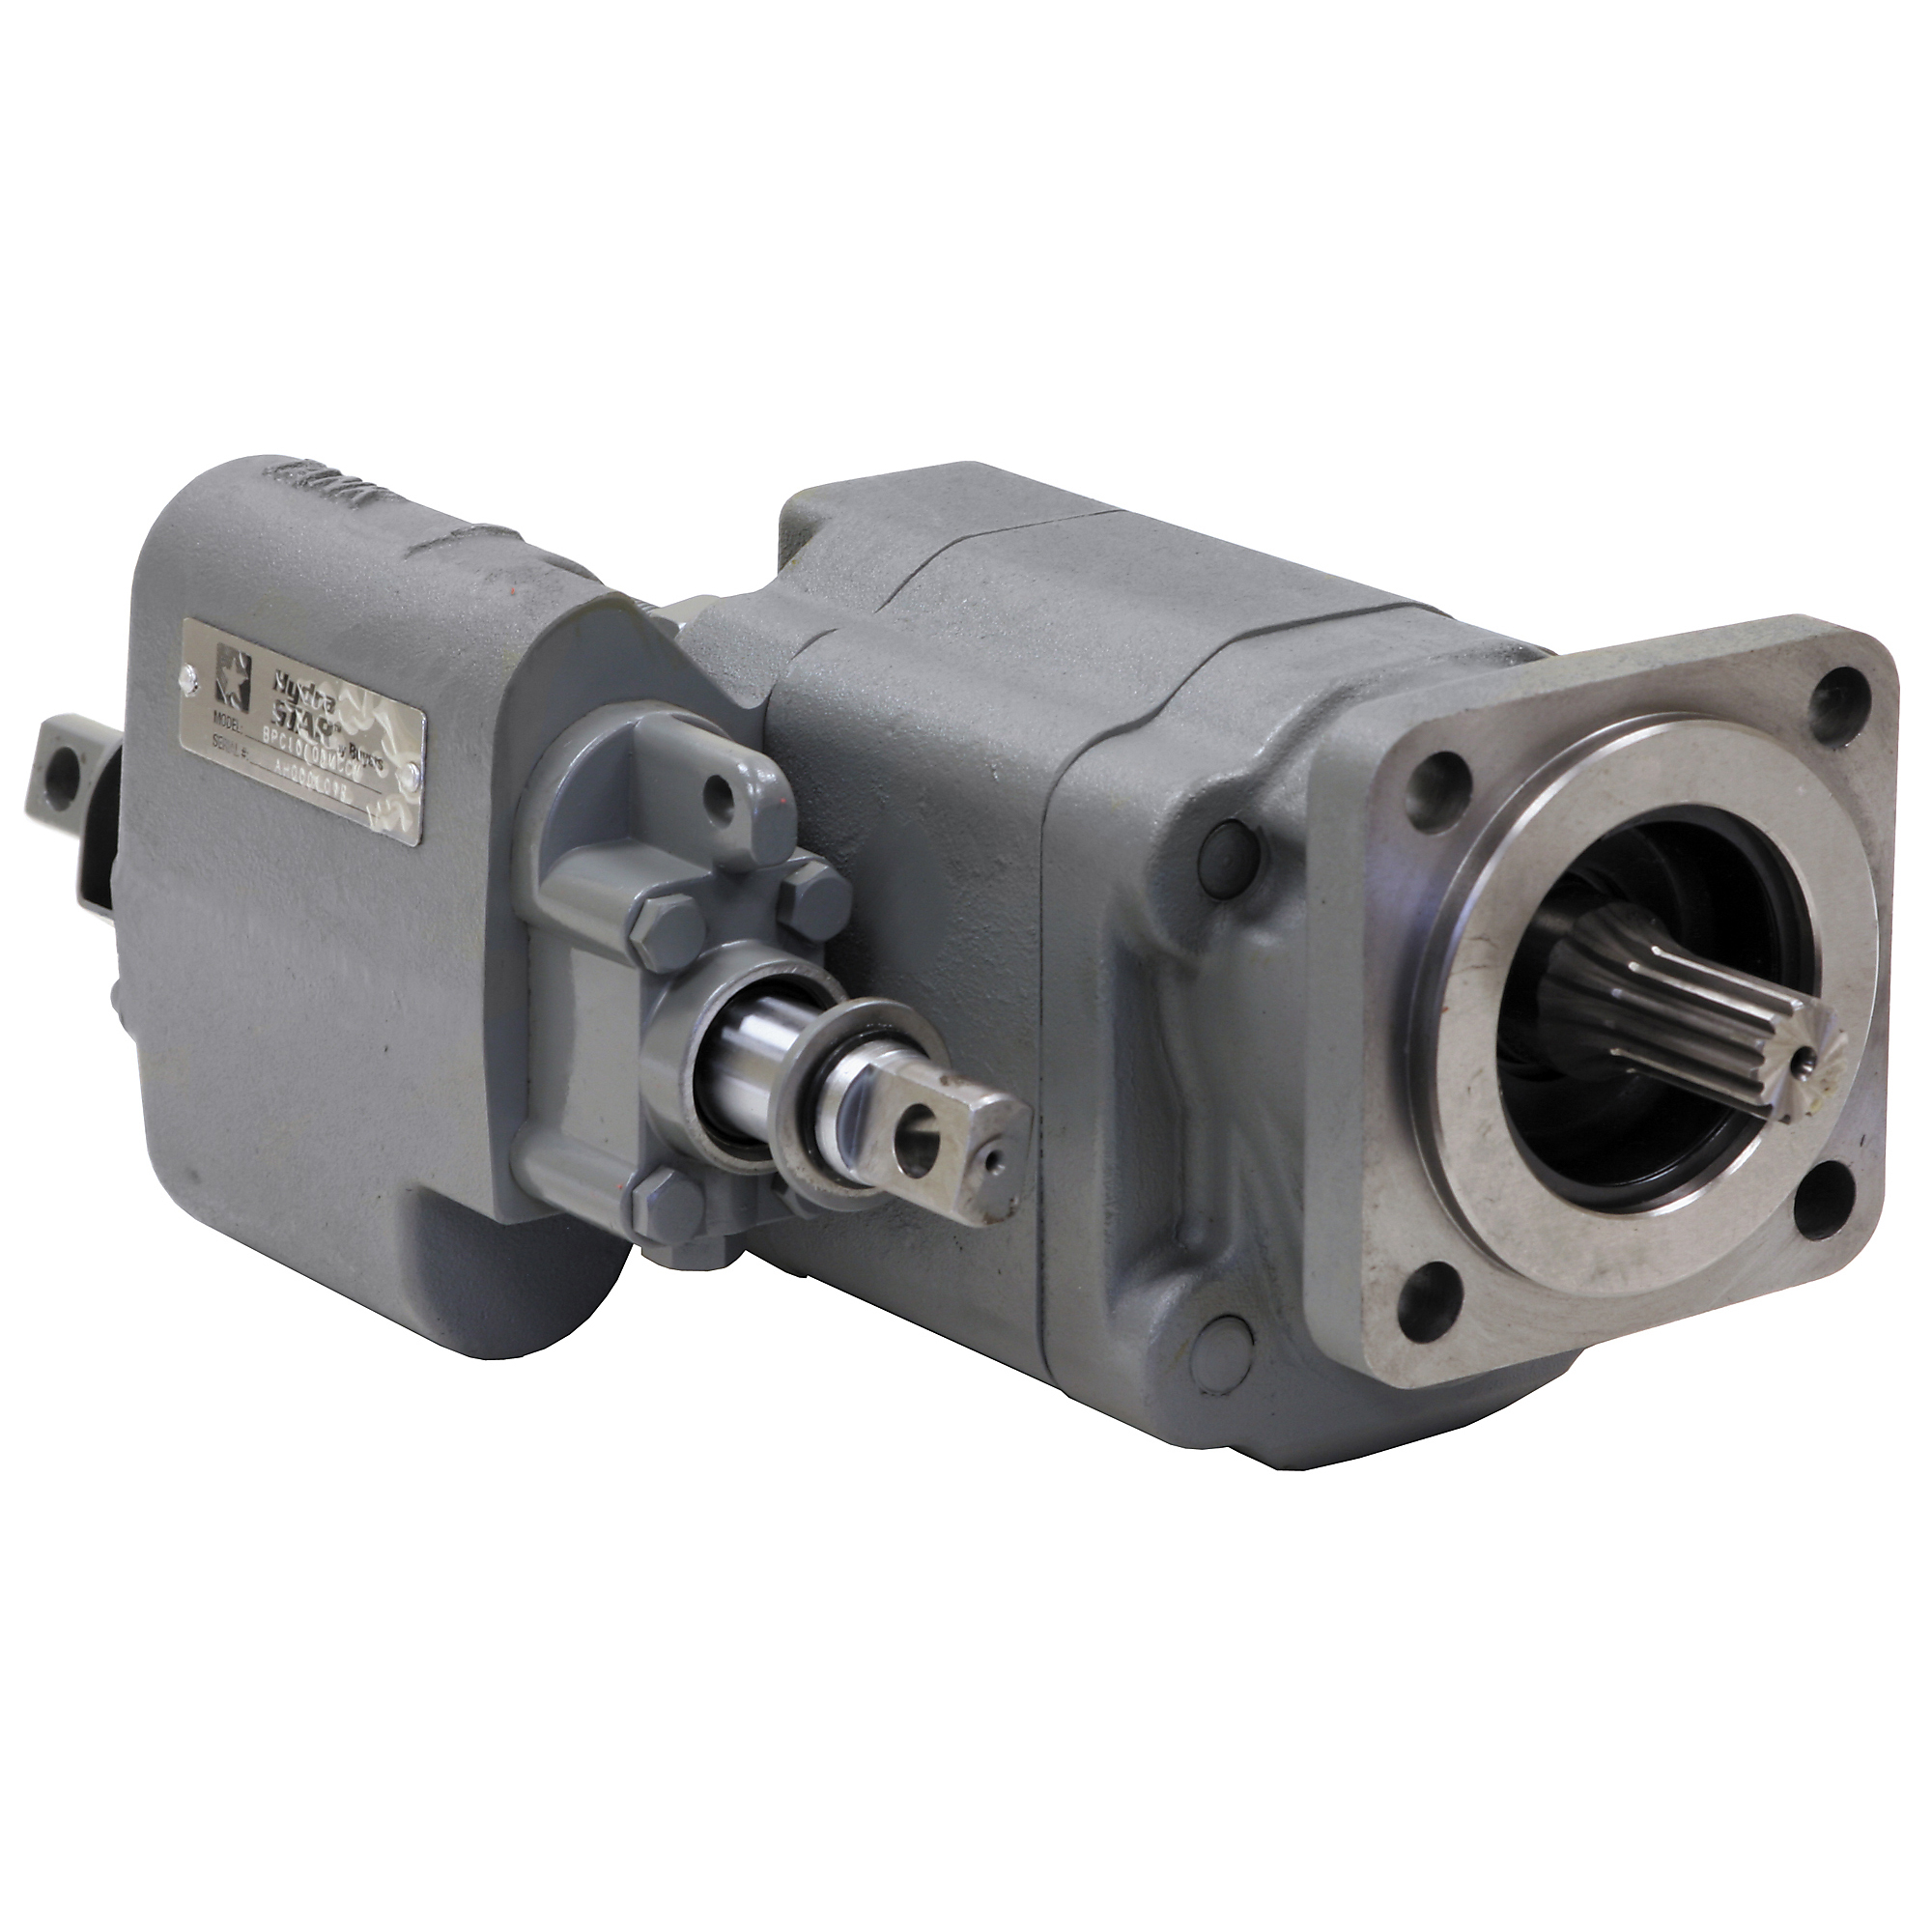 Buyers Products Air Shift Hydraulic Cylinder Pump, Max. PSI 2500, Max. RPM 2000, Model C1010DMCWAS